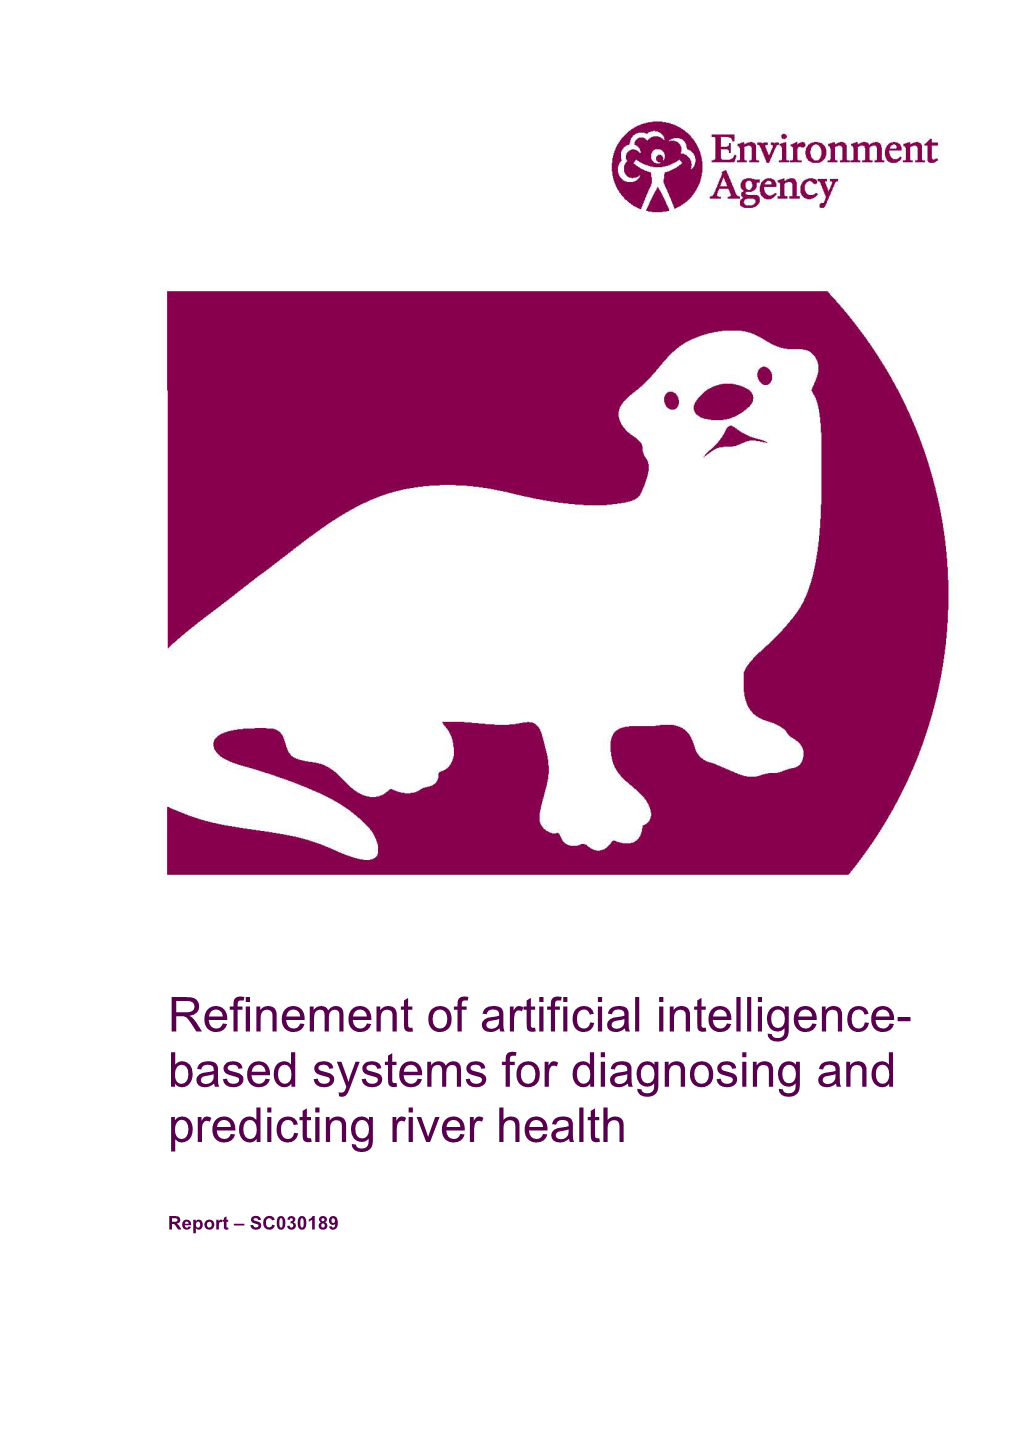 Based Systems for Diagnosing and Predicting River Health